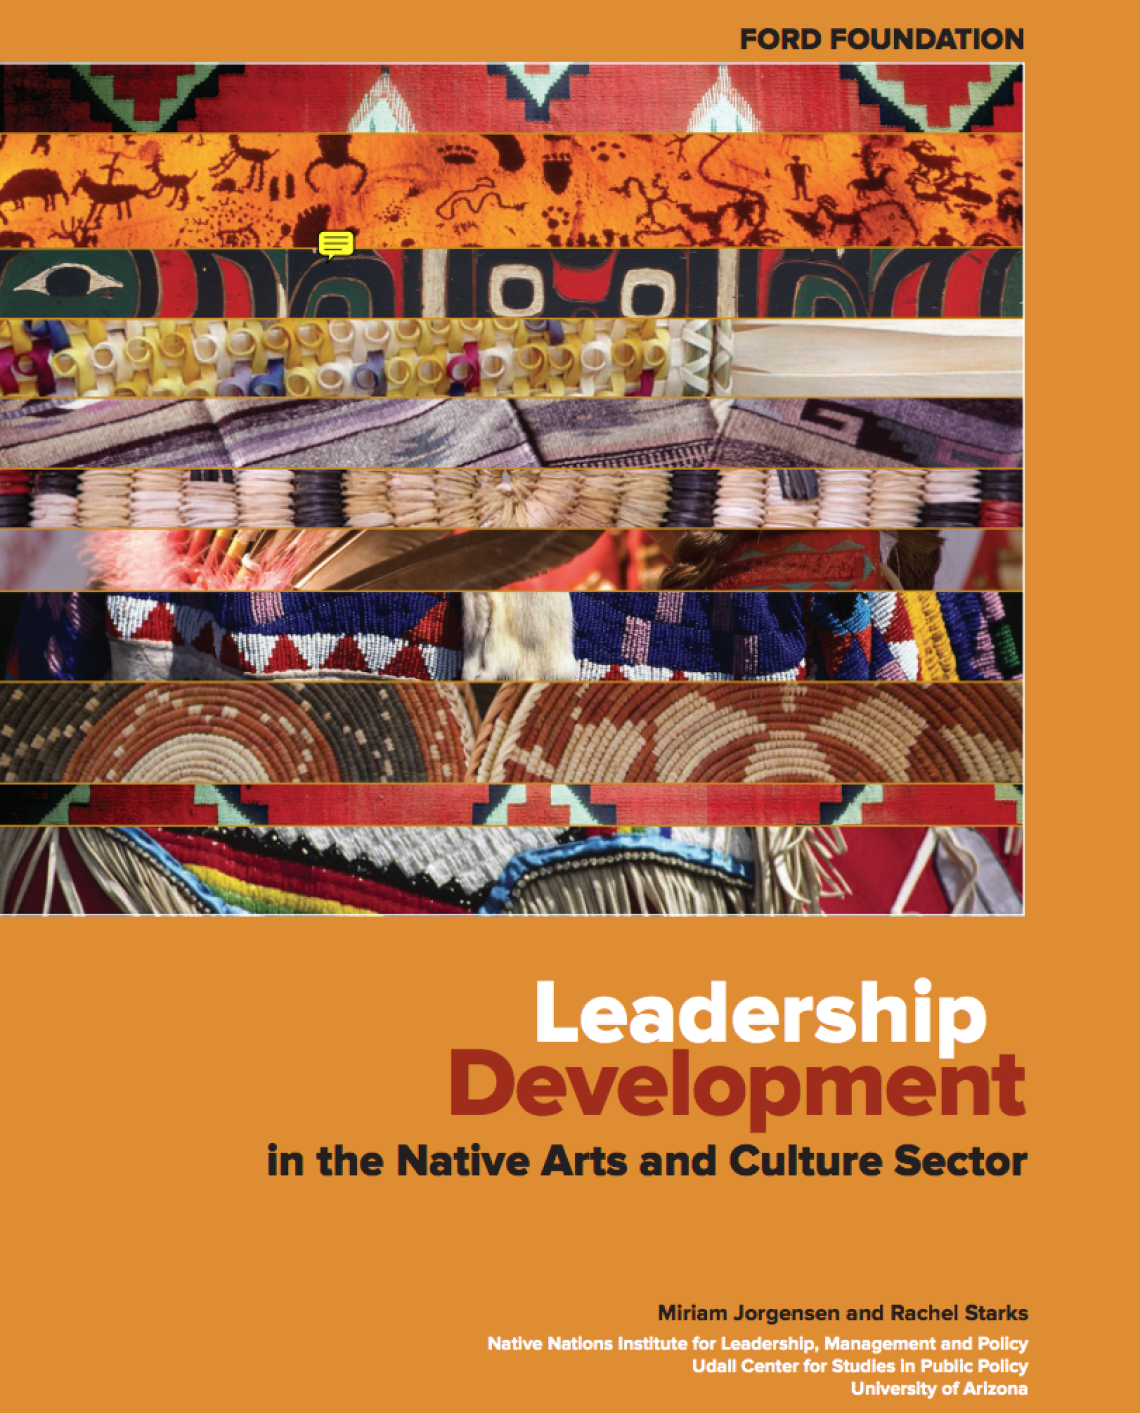 Leadership Development in the Native Arts and Culture Sector